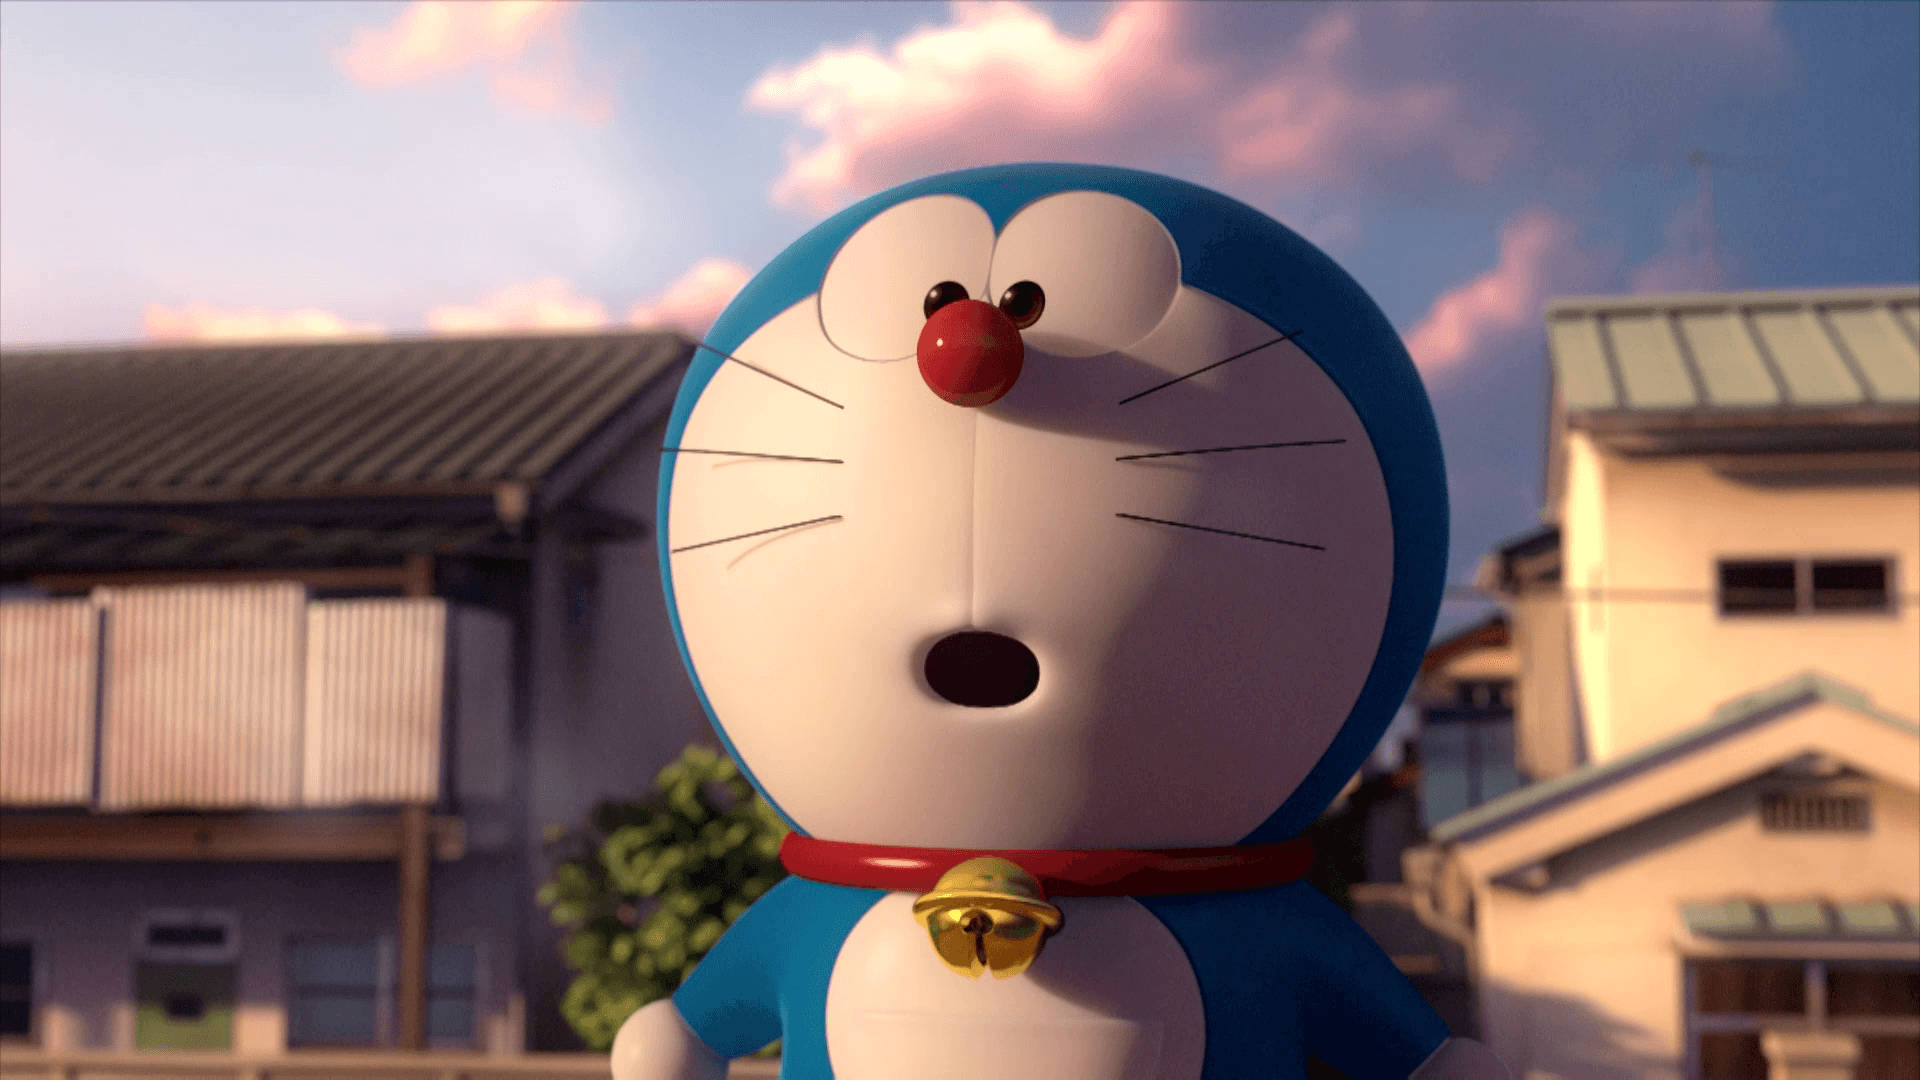 Doraemon D Wallpapers Backgrounds For FREE Wallpapers Com